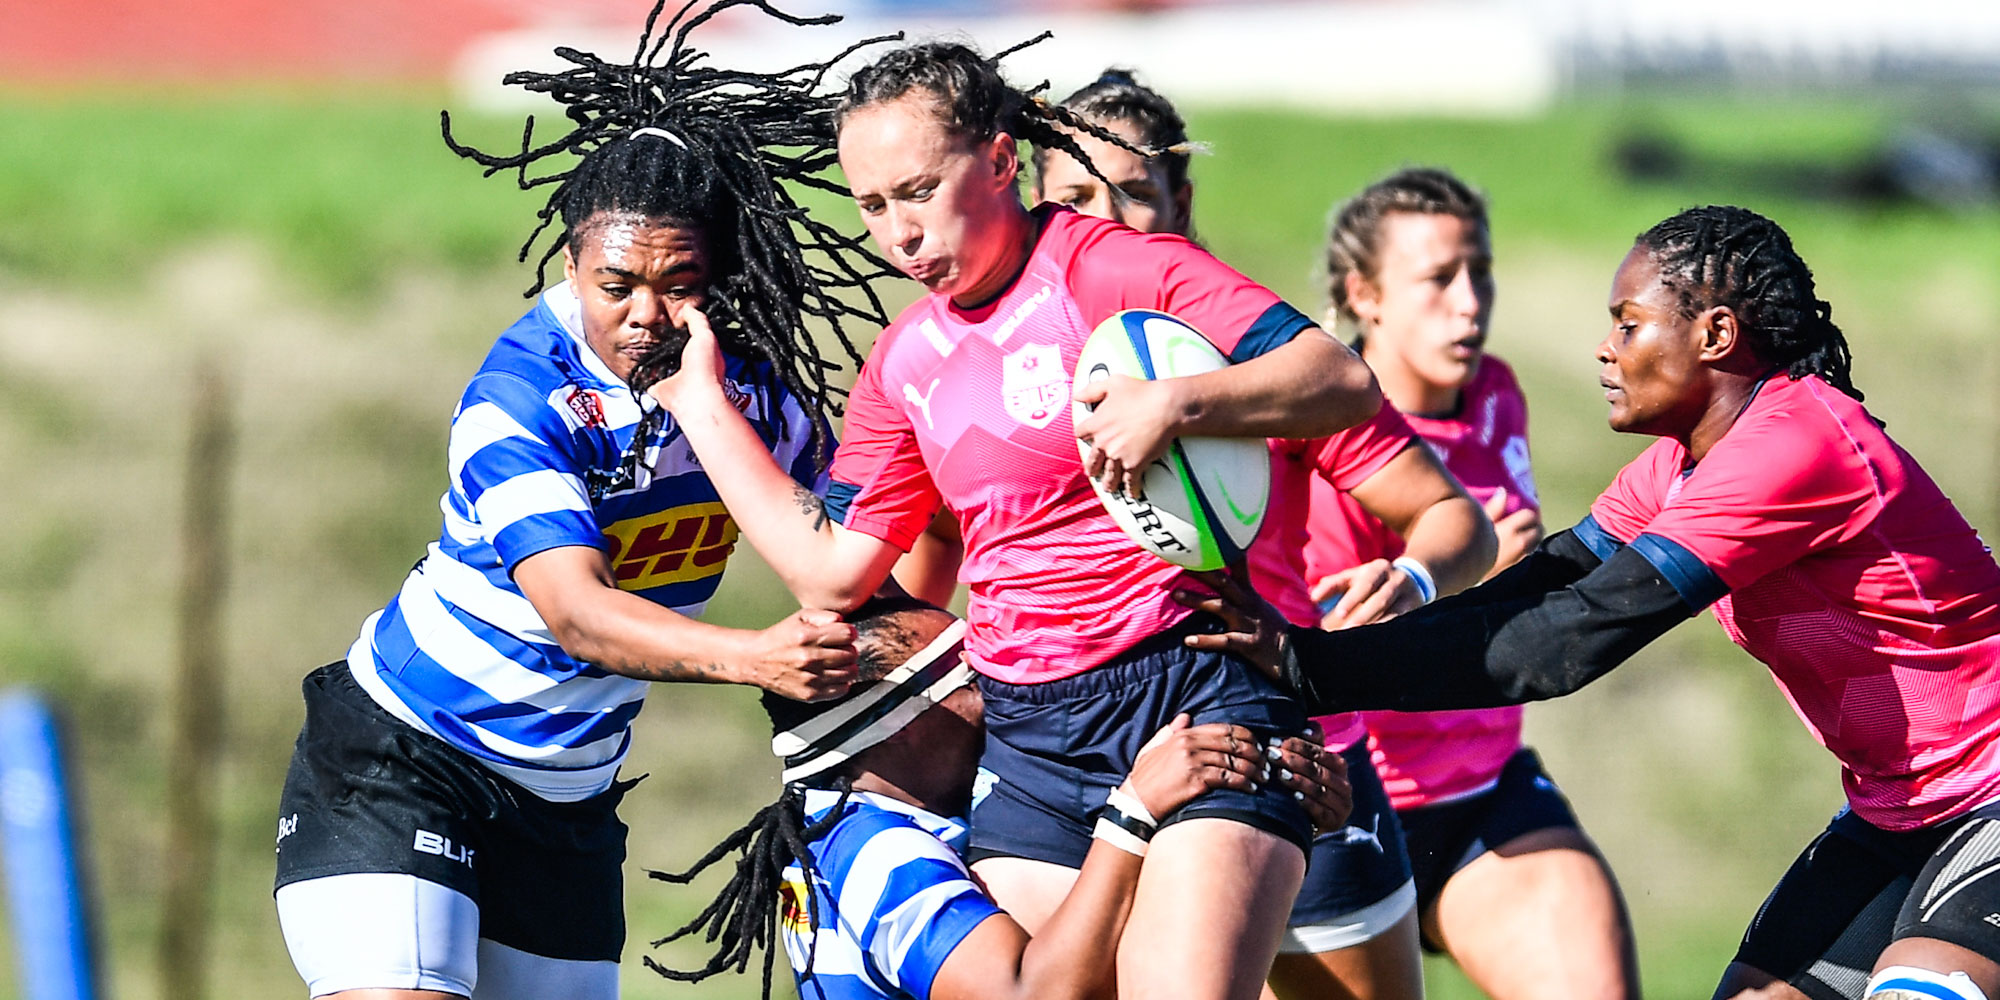 Shiniqwa Lamprecht in action for the Bulls Daisies senior team earlier this year.